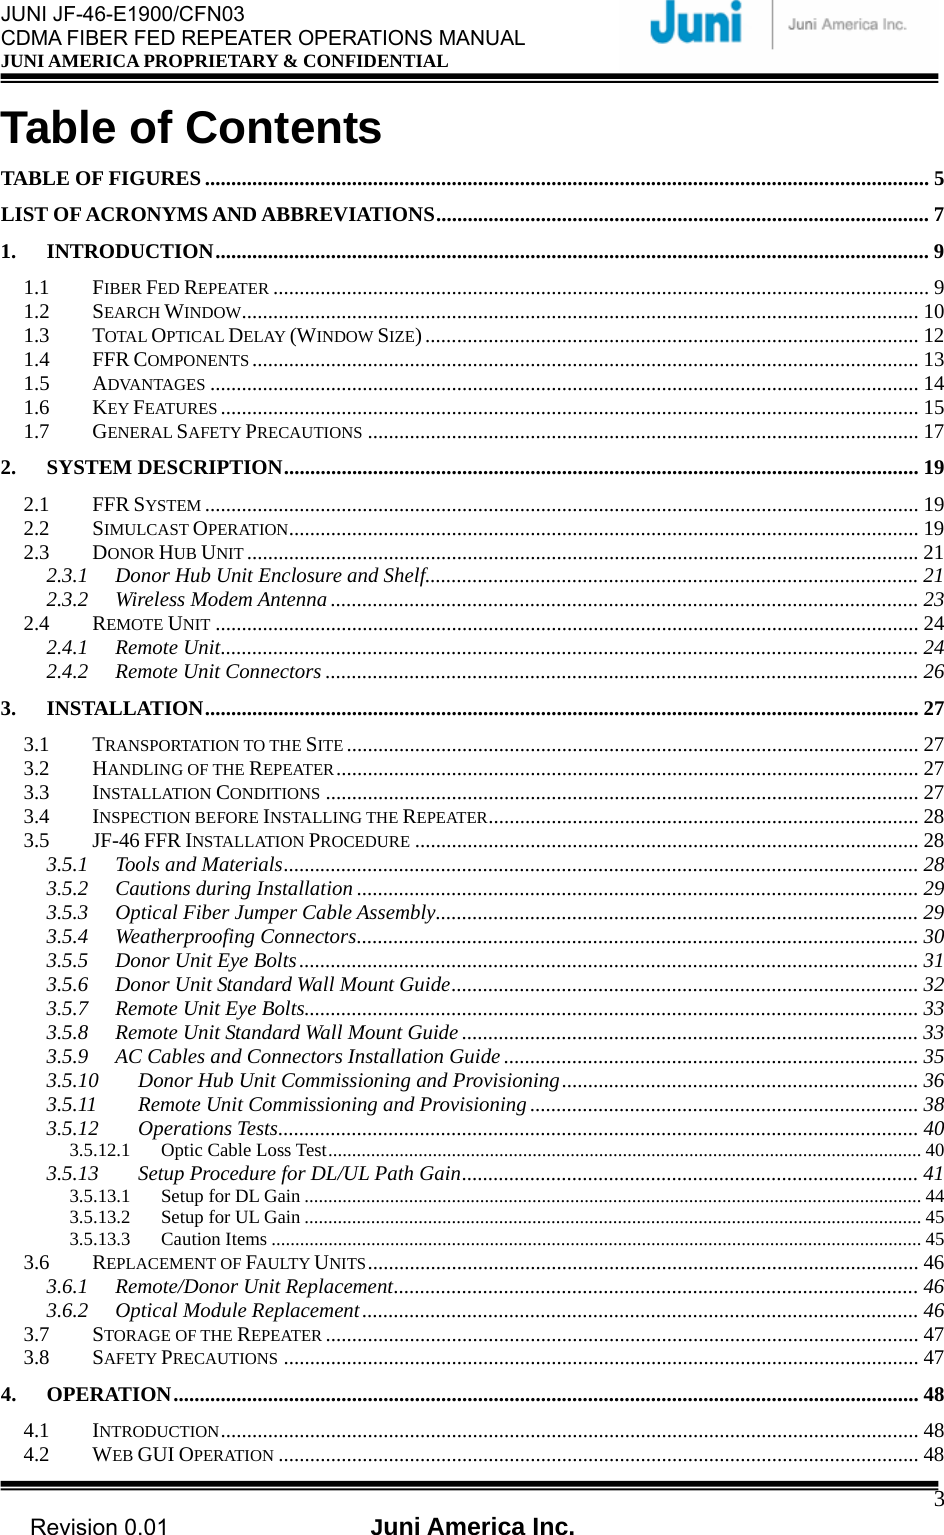  JUNI JF-46-E1900/CFN03 CDMA FIBER FED REPEATER OPERATIONS MANUAL JUNI AMERICA PROPRIETARY &amp; CONFIDENTIAL                                   Revision 0.01  Juni America Inc.  3Table of Contents TABLE OF FIGURES .......................................................................................................................................... 5 LIST OF ACRONYMS AND ABBREVIATIONS..............................................................................................7 1. INTRODUCTION........................................................................................................................................ 9 1.1 FIBER FED REPEATER ............................................................................................................................. 9 1.2 SEARCH WINDOW................................................................................................................................. 10 1.3 TOTAL OPTICAL DELAY (WINDOW SIZE).............................................................................................. 12 1.4 FFR COMPONENTS ............................................................................................................................... 13 1.5 ADVANTAGES ....................................................................................................................................... 14 1.6 KEY FEATURES ..................................................................................................................................... 15 1.7 GENERAL SAFETY PRECAUTIONS ......................................................................................................... 17 2. SYSTEM DESCRIPTION......................................................................................................................... 19 2.1 FFR SYSTEM ........................................................................................................................................ 19 2.2 SIMULCAST OPERATION........................................................................................................................ 19 2.3 DONOR HUB UNIT ................................................................................................................................ 21 2.3.1 Donor Hub Unit Enclosure and Shelf.............................................................................................. 21 2.3.2 Wireless Modem Antenna ................................................................................................................ 23 2.4 REMOTE UNIT ...................................................................................................................................... 24 2.4.1 Remote Unit..................................................................................................................................... 24 2.4.2 Remote Unit Connectors ................................................................................................................. 26 3. INSTALLATION........................................................................................................................................ 27 3.1 TRANSPORTATION TO THE SITE ............................................................................................................. 27 3.2 HANDLING OF THE REPEATER............................................................................................................... 27 3.3 INSTALLATION CONDITIONS ................................................................................................................. 27 3.4 INSPECTION BEFORE INSTALLING THE REPEATER.................................................................................. 28 3.5 JF-46 FFR INSTALLATION PROCEDURE ................................................................................................ 28 3.5.1 Tools and Materials......................................................................................................................... 28 3.5.2 Cautions during Installation ........................................................................................................... 29 3.5.3 Optical Fiber Jumper Cable Assembly............................................................................................ 29 3.5.4 Weatherproofing Connectors........................................................................................................... 30 3.5.5 Donor Unit Eye Bolts...................................................................................................................... 31 3.5.6 Donor Unit Standard Wall Mount Guide......................................................................................... 32 3.5.7 Remote Unit Eye Bolts..................................................................................................................... 33 3.5.8 Remote Unit Standard Wall Mount Guide....................................................................................... 33 3.5.9 AC Cables and Connectors Installation Guide ............................................................................... 35 3.5.10 Donor Hub Unit Commissioning and Provisioning.................................................................... 36 3.5.11 Remote Unit Commissioning and Provisioning .......................................................................... 38 3.5.12 Operations Tests.......................................................................................................................... 40 3.5.12.1 Optic Cable Loss Test............................................................................................................................. 40 3.5.13 Setup Procedure for DL/UL Path Gain....................................................................................... 41 3.5.13.1 Setup for DL Gain .................................................................................................................................. 44 3.5.13.2 Setup for UL Gain .................................................................................................................................. 45 3.5.13.3 Caution Items ......................................................................................................................................... 45 3.6 REPLACEMENT OF FAULTY UNITS......................................................................................................... 46 3.6.1 Remote/Donor Unit Replacement.................................................................................................... 46 3.6.2 Optical Module Replacement.......................................................................................................... 46 3.7 STORAGE OF THE REPEATER ................................................................................................................. 47 3.8 SAFETY PRECAUTIONS ......................................................................................................................... 47 4. OPERATION.............................................................................................................................................. 48 4.1 INTRODUCTION..................................................................................................................................... 48 4.2 WEB GUI OPERATION .......................................................................................................................... 48 